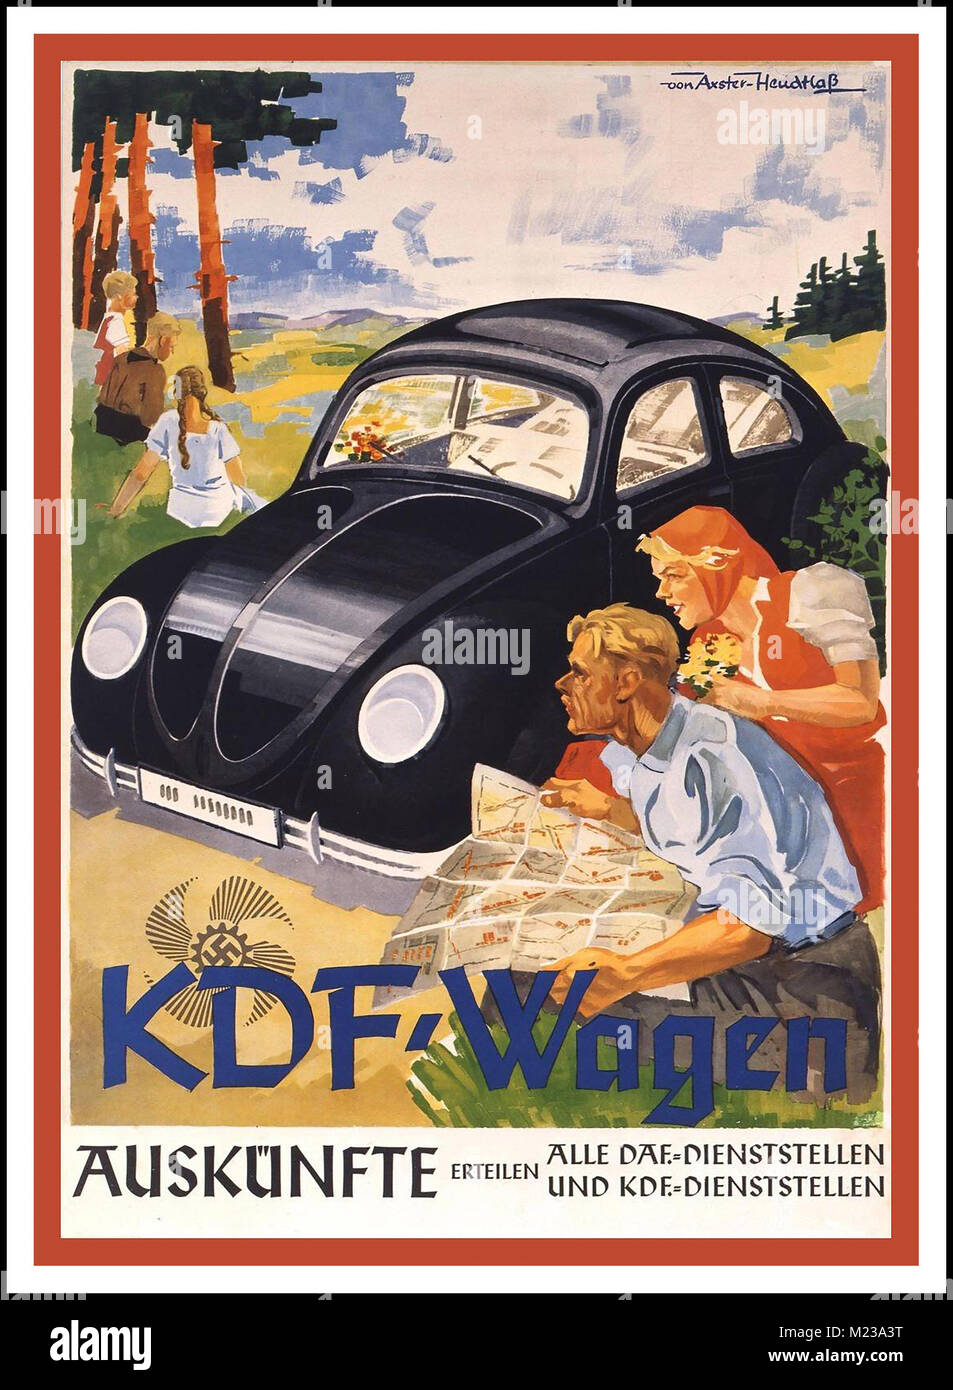 KDF WAGEN VINTAGE 1930’s POSTER KDF WAGEN (strength through joy) VOLKSWAGEN PEOPLE’S CAR 1938 Nazi Germany advertisement for the Volkswagen, produced by the Nazi Trade Union “German Labour Front” with idealistic Aryan German Family illustrated in halcyon situation and Swastika emblem featured Stock Photo